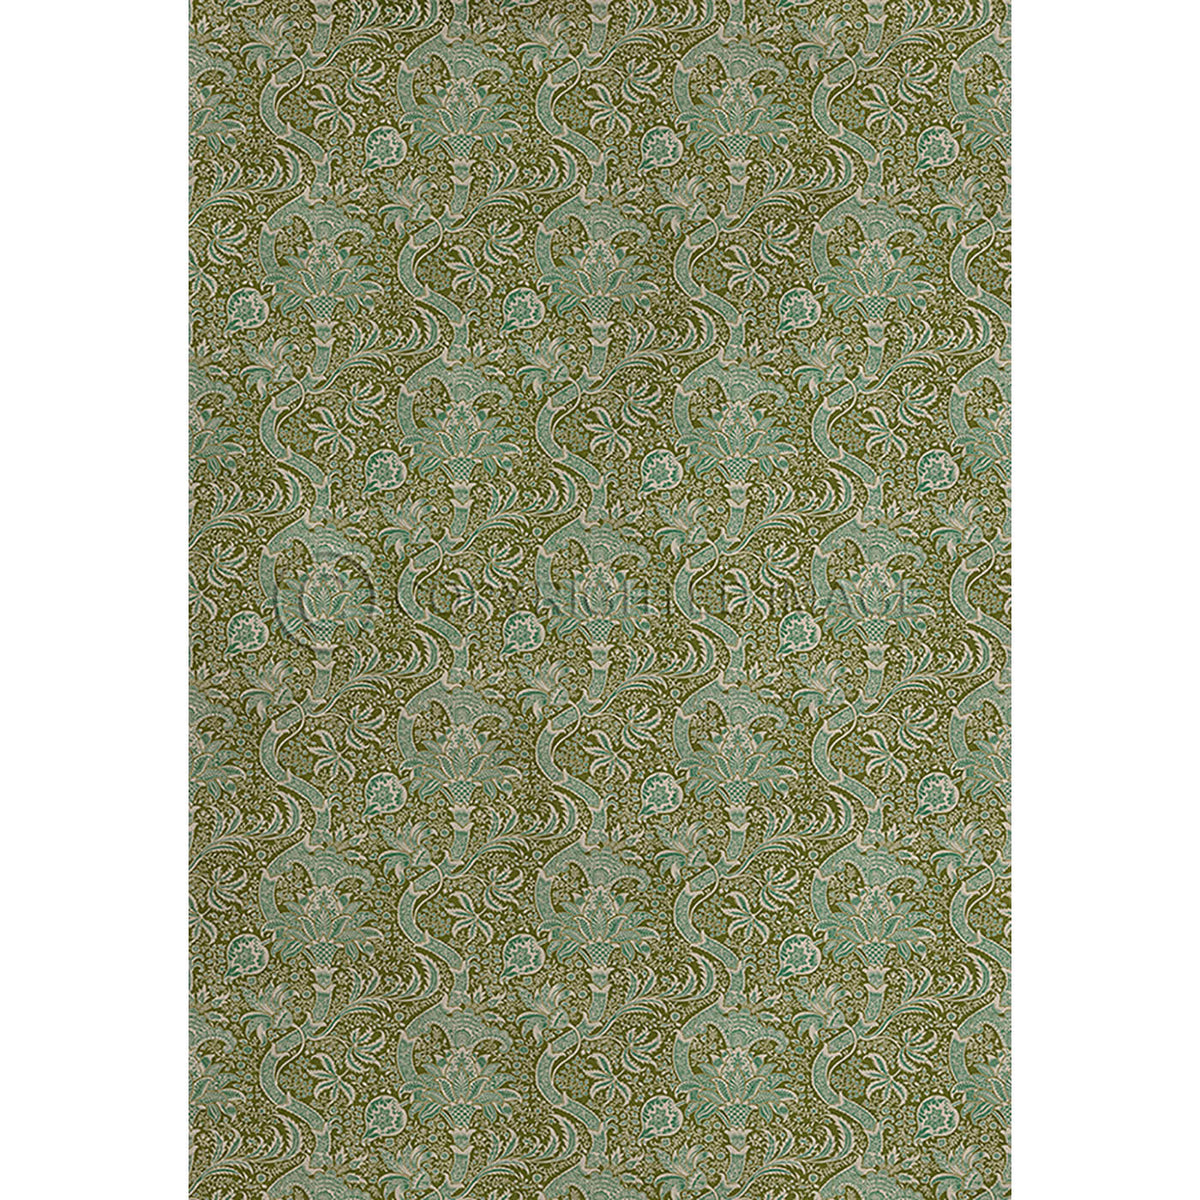 Indian Olive and Teal 120x175